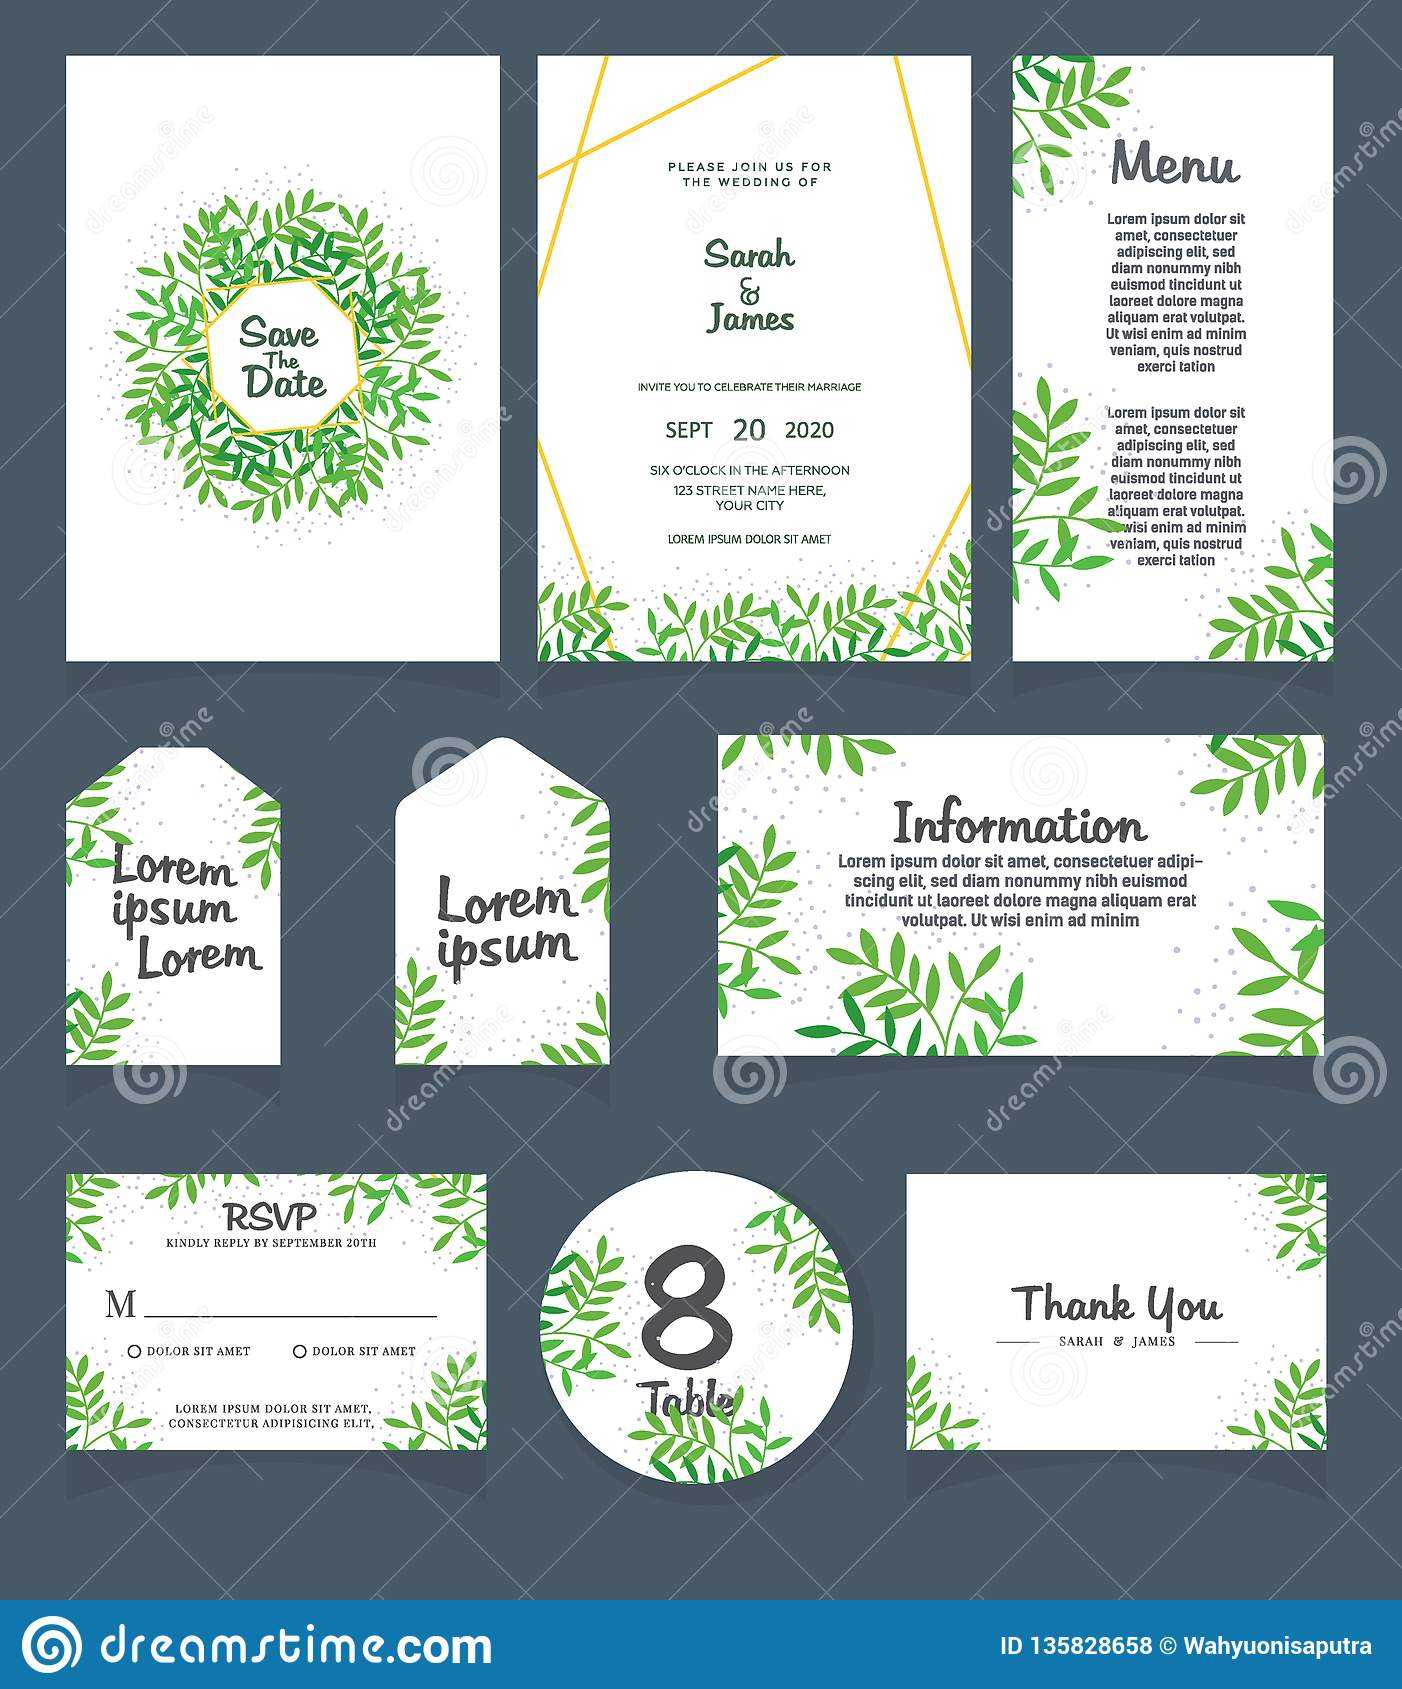 Wedding Invitation Card Template. Wedding Invitation, Thank Intended For Table Place Card Template Free Download